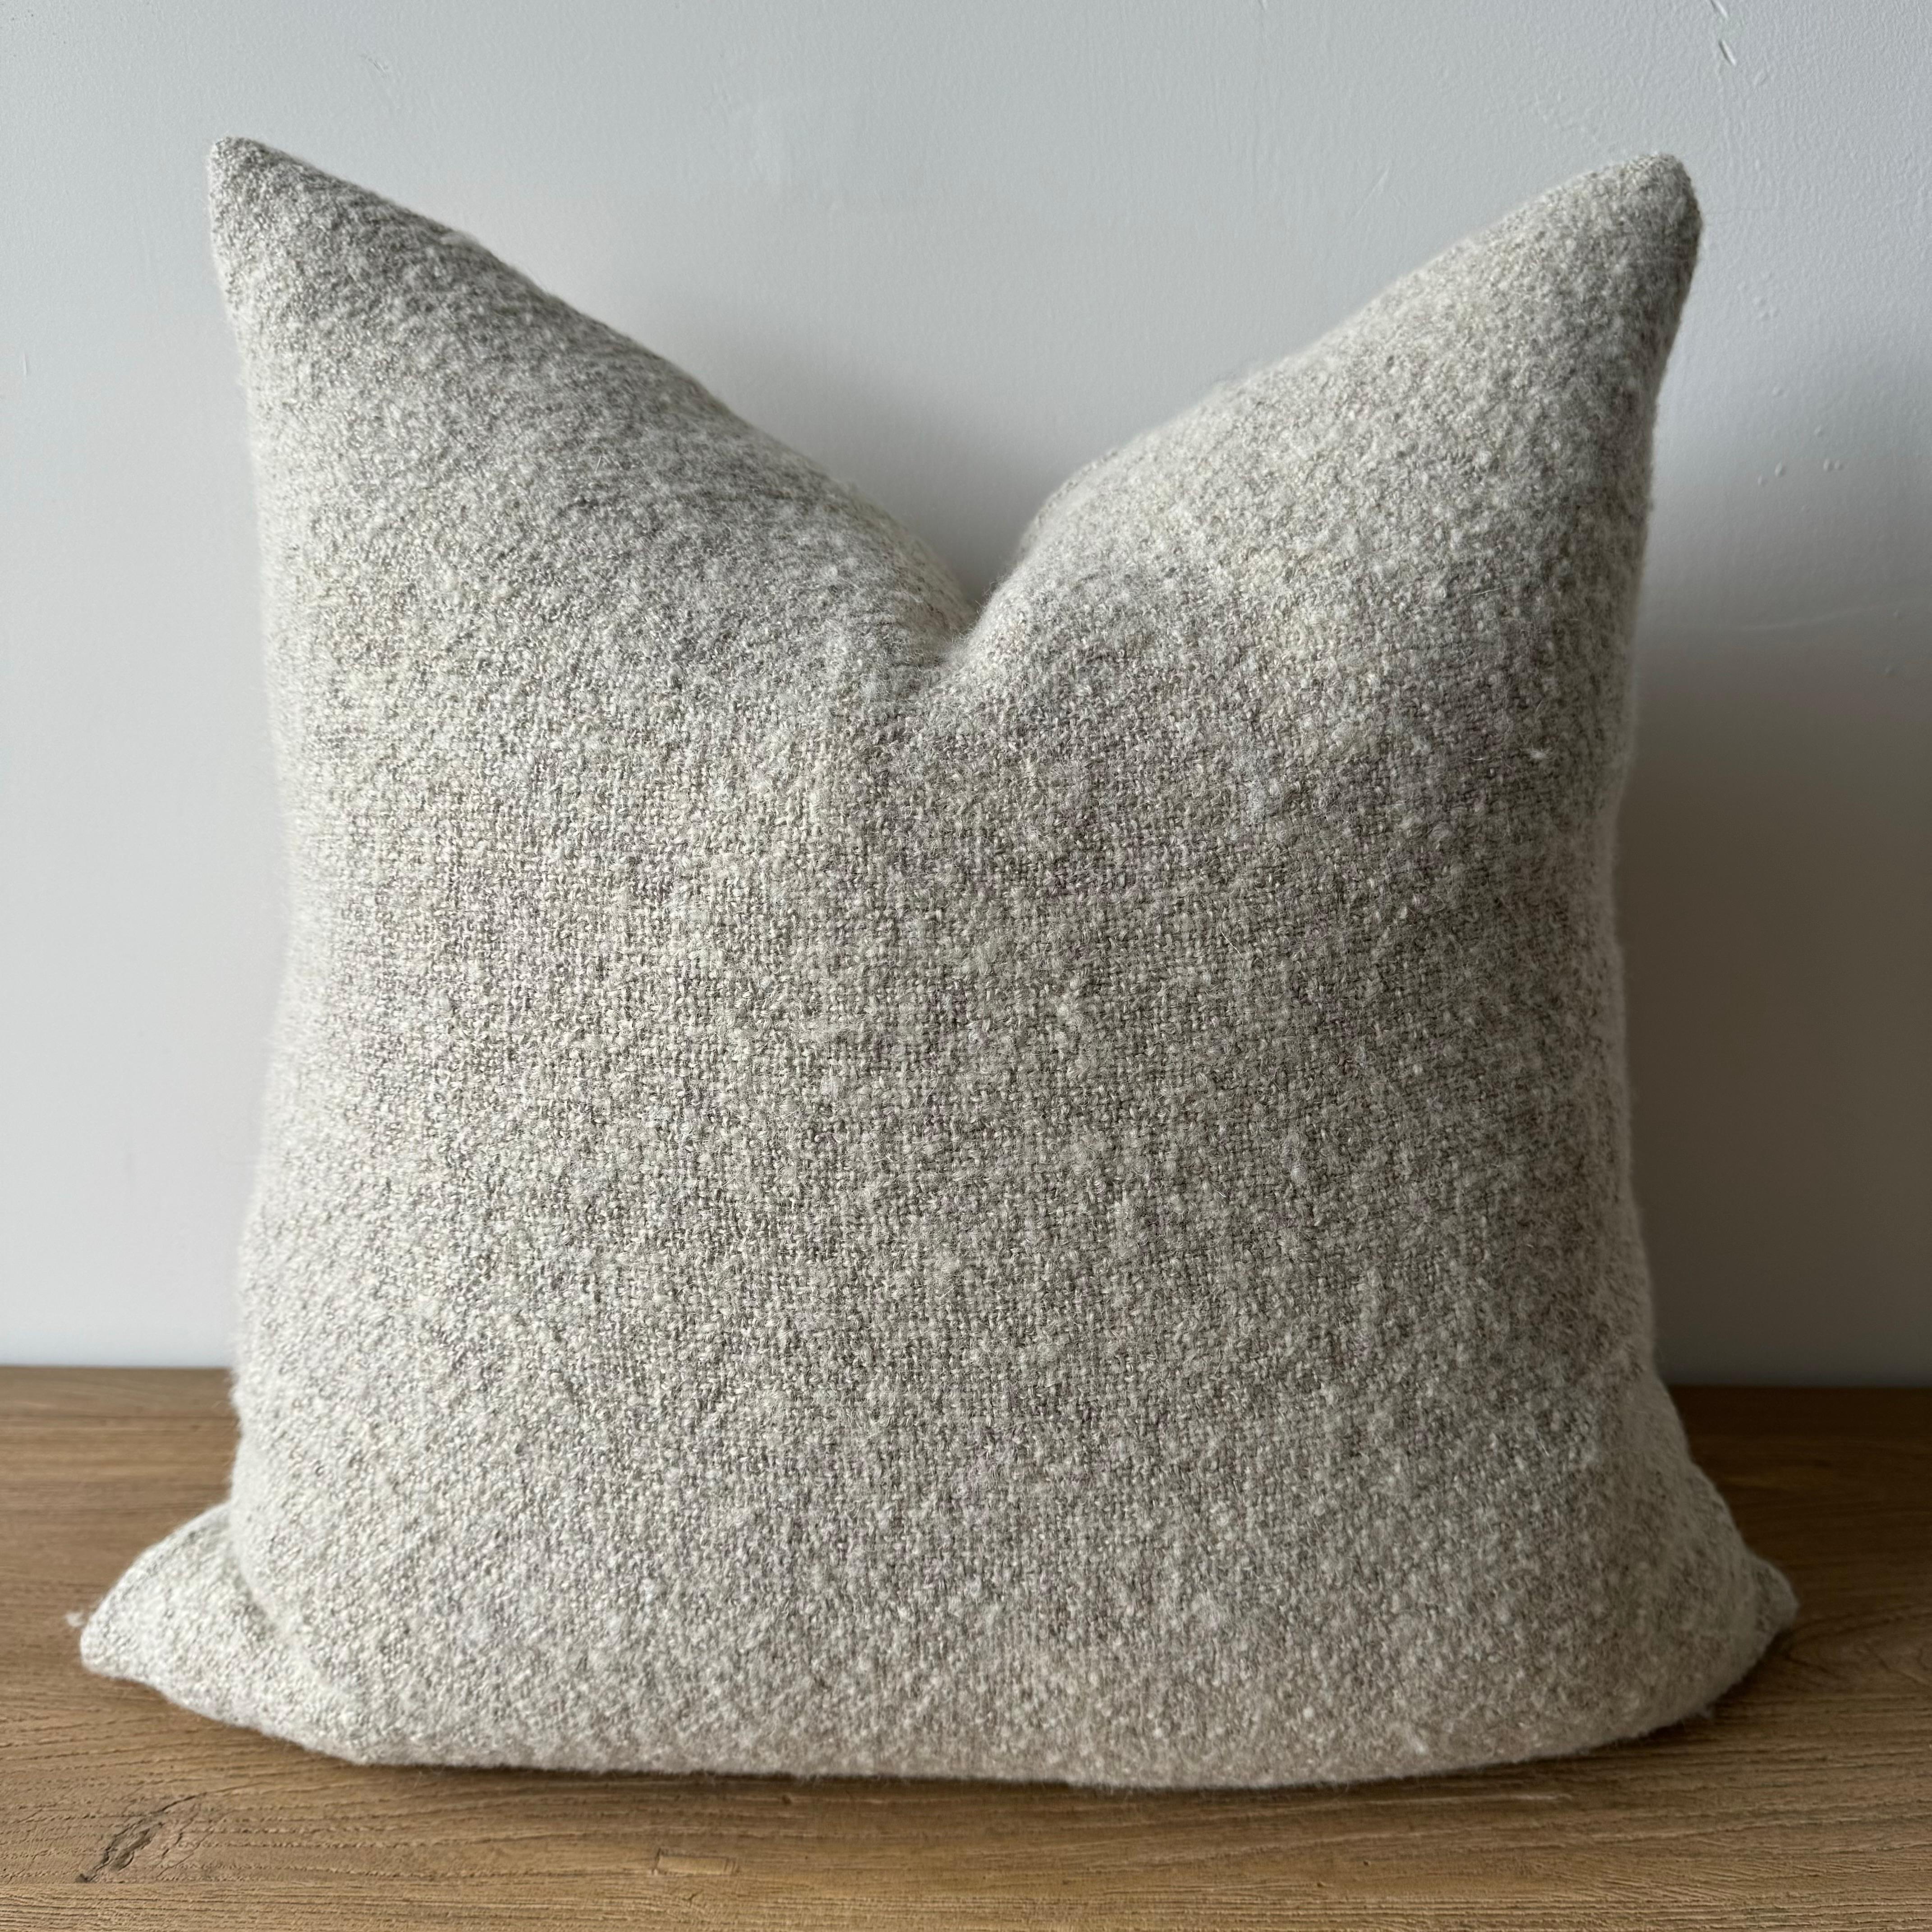 A soft natural flax oatmeal and beige woven fibers in a stonewash finish create this luxurious soft pillow. Sewn with an antique brass zipper closure and overlocked edges.
Includes a down/ feather insert.
Size: 22 x 22
-51% Linen
-39% Wool
-10%